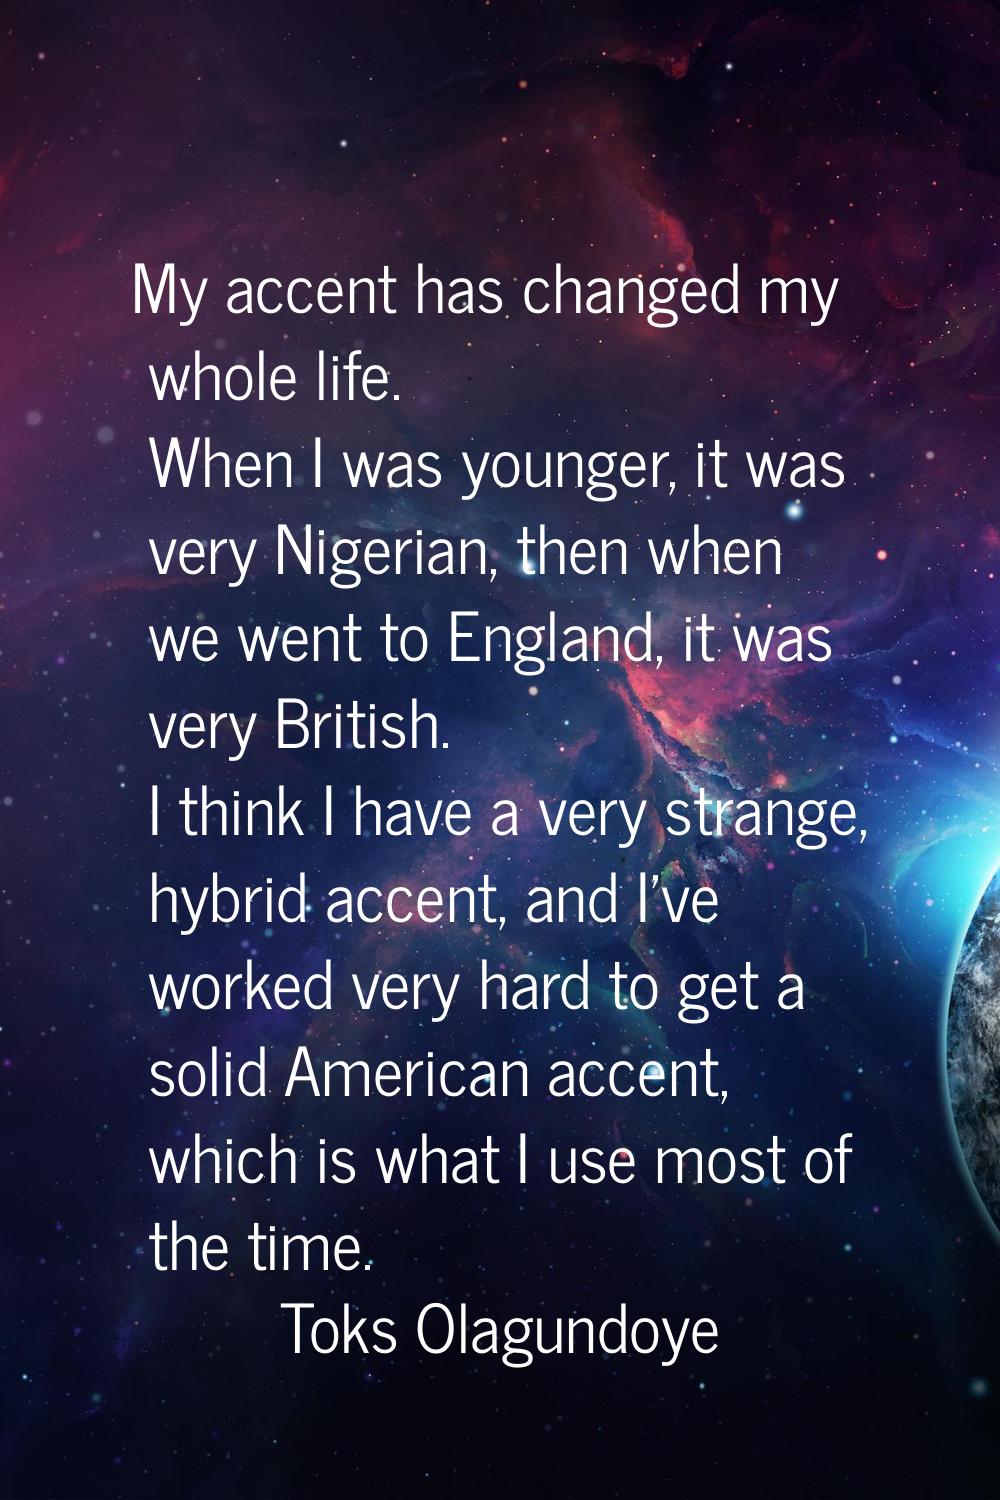 My accent has changed my whole life. When I was younger, it was very Nigerian, then when we went to